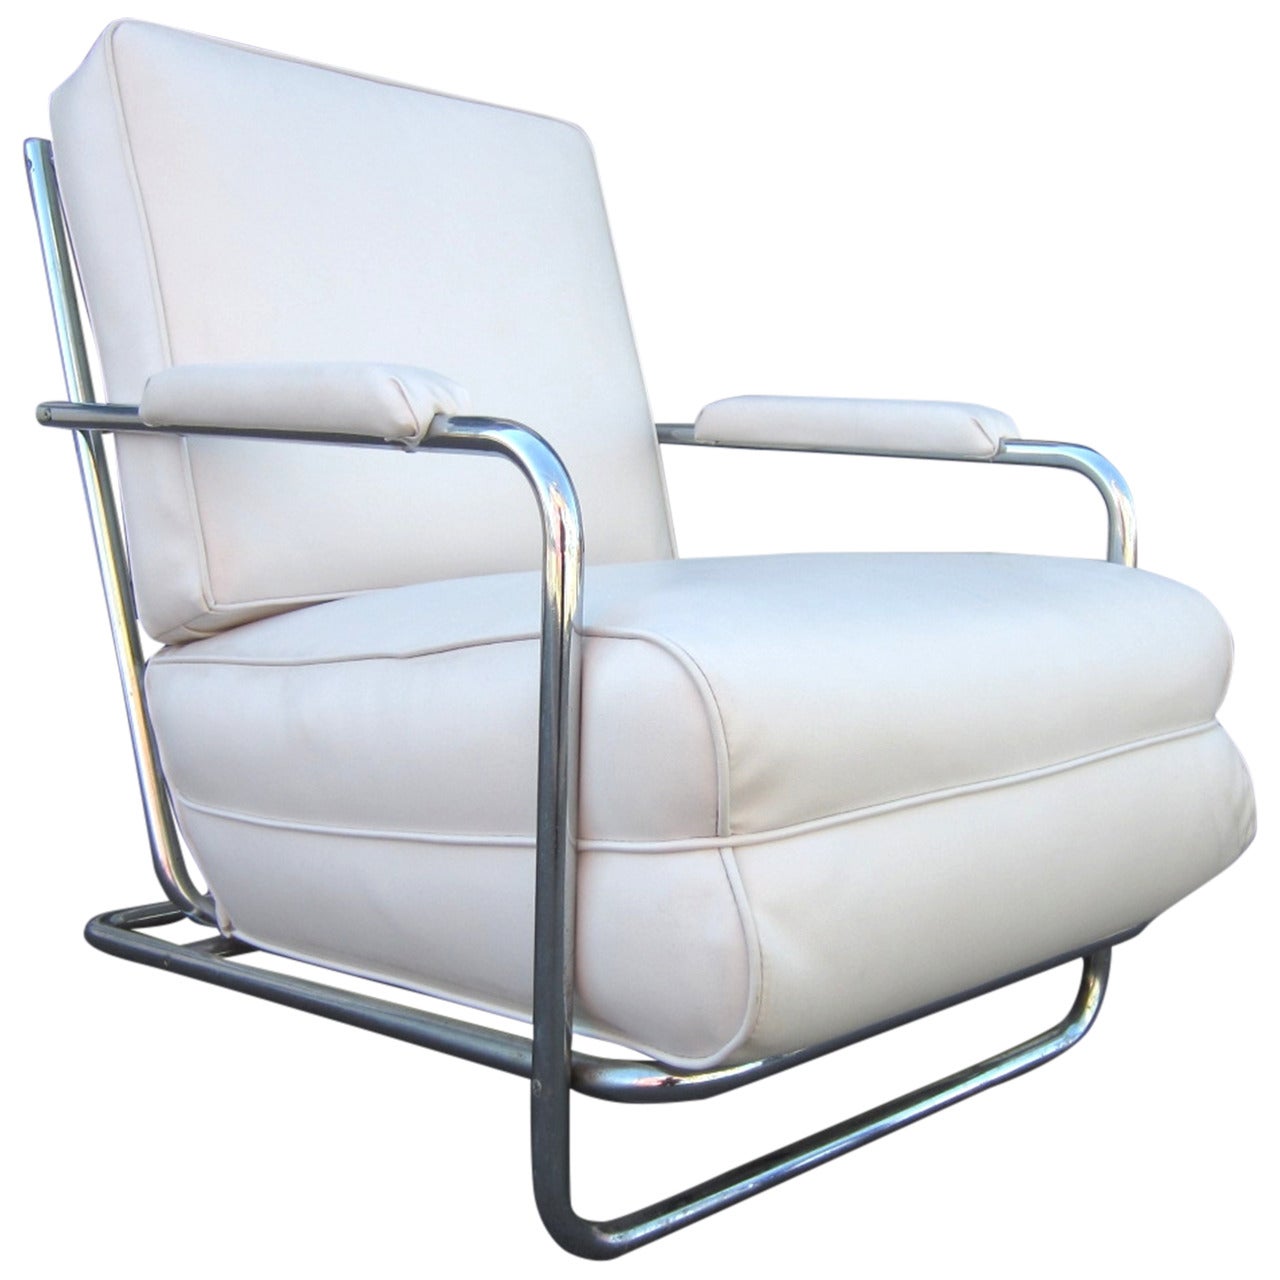 Mid-20th Century Art Deco Lounge Chair by Gilbert Rohde for Troy Sunshade Company